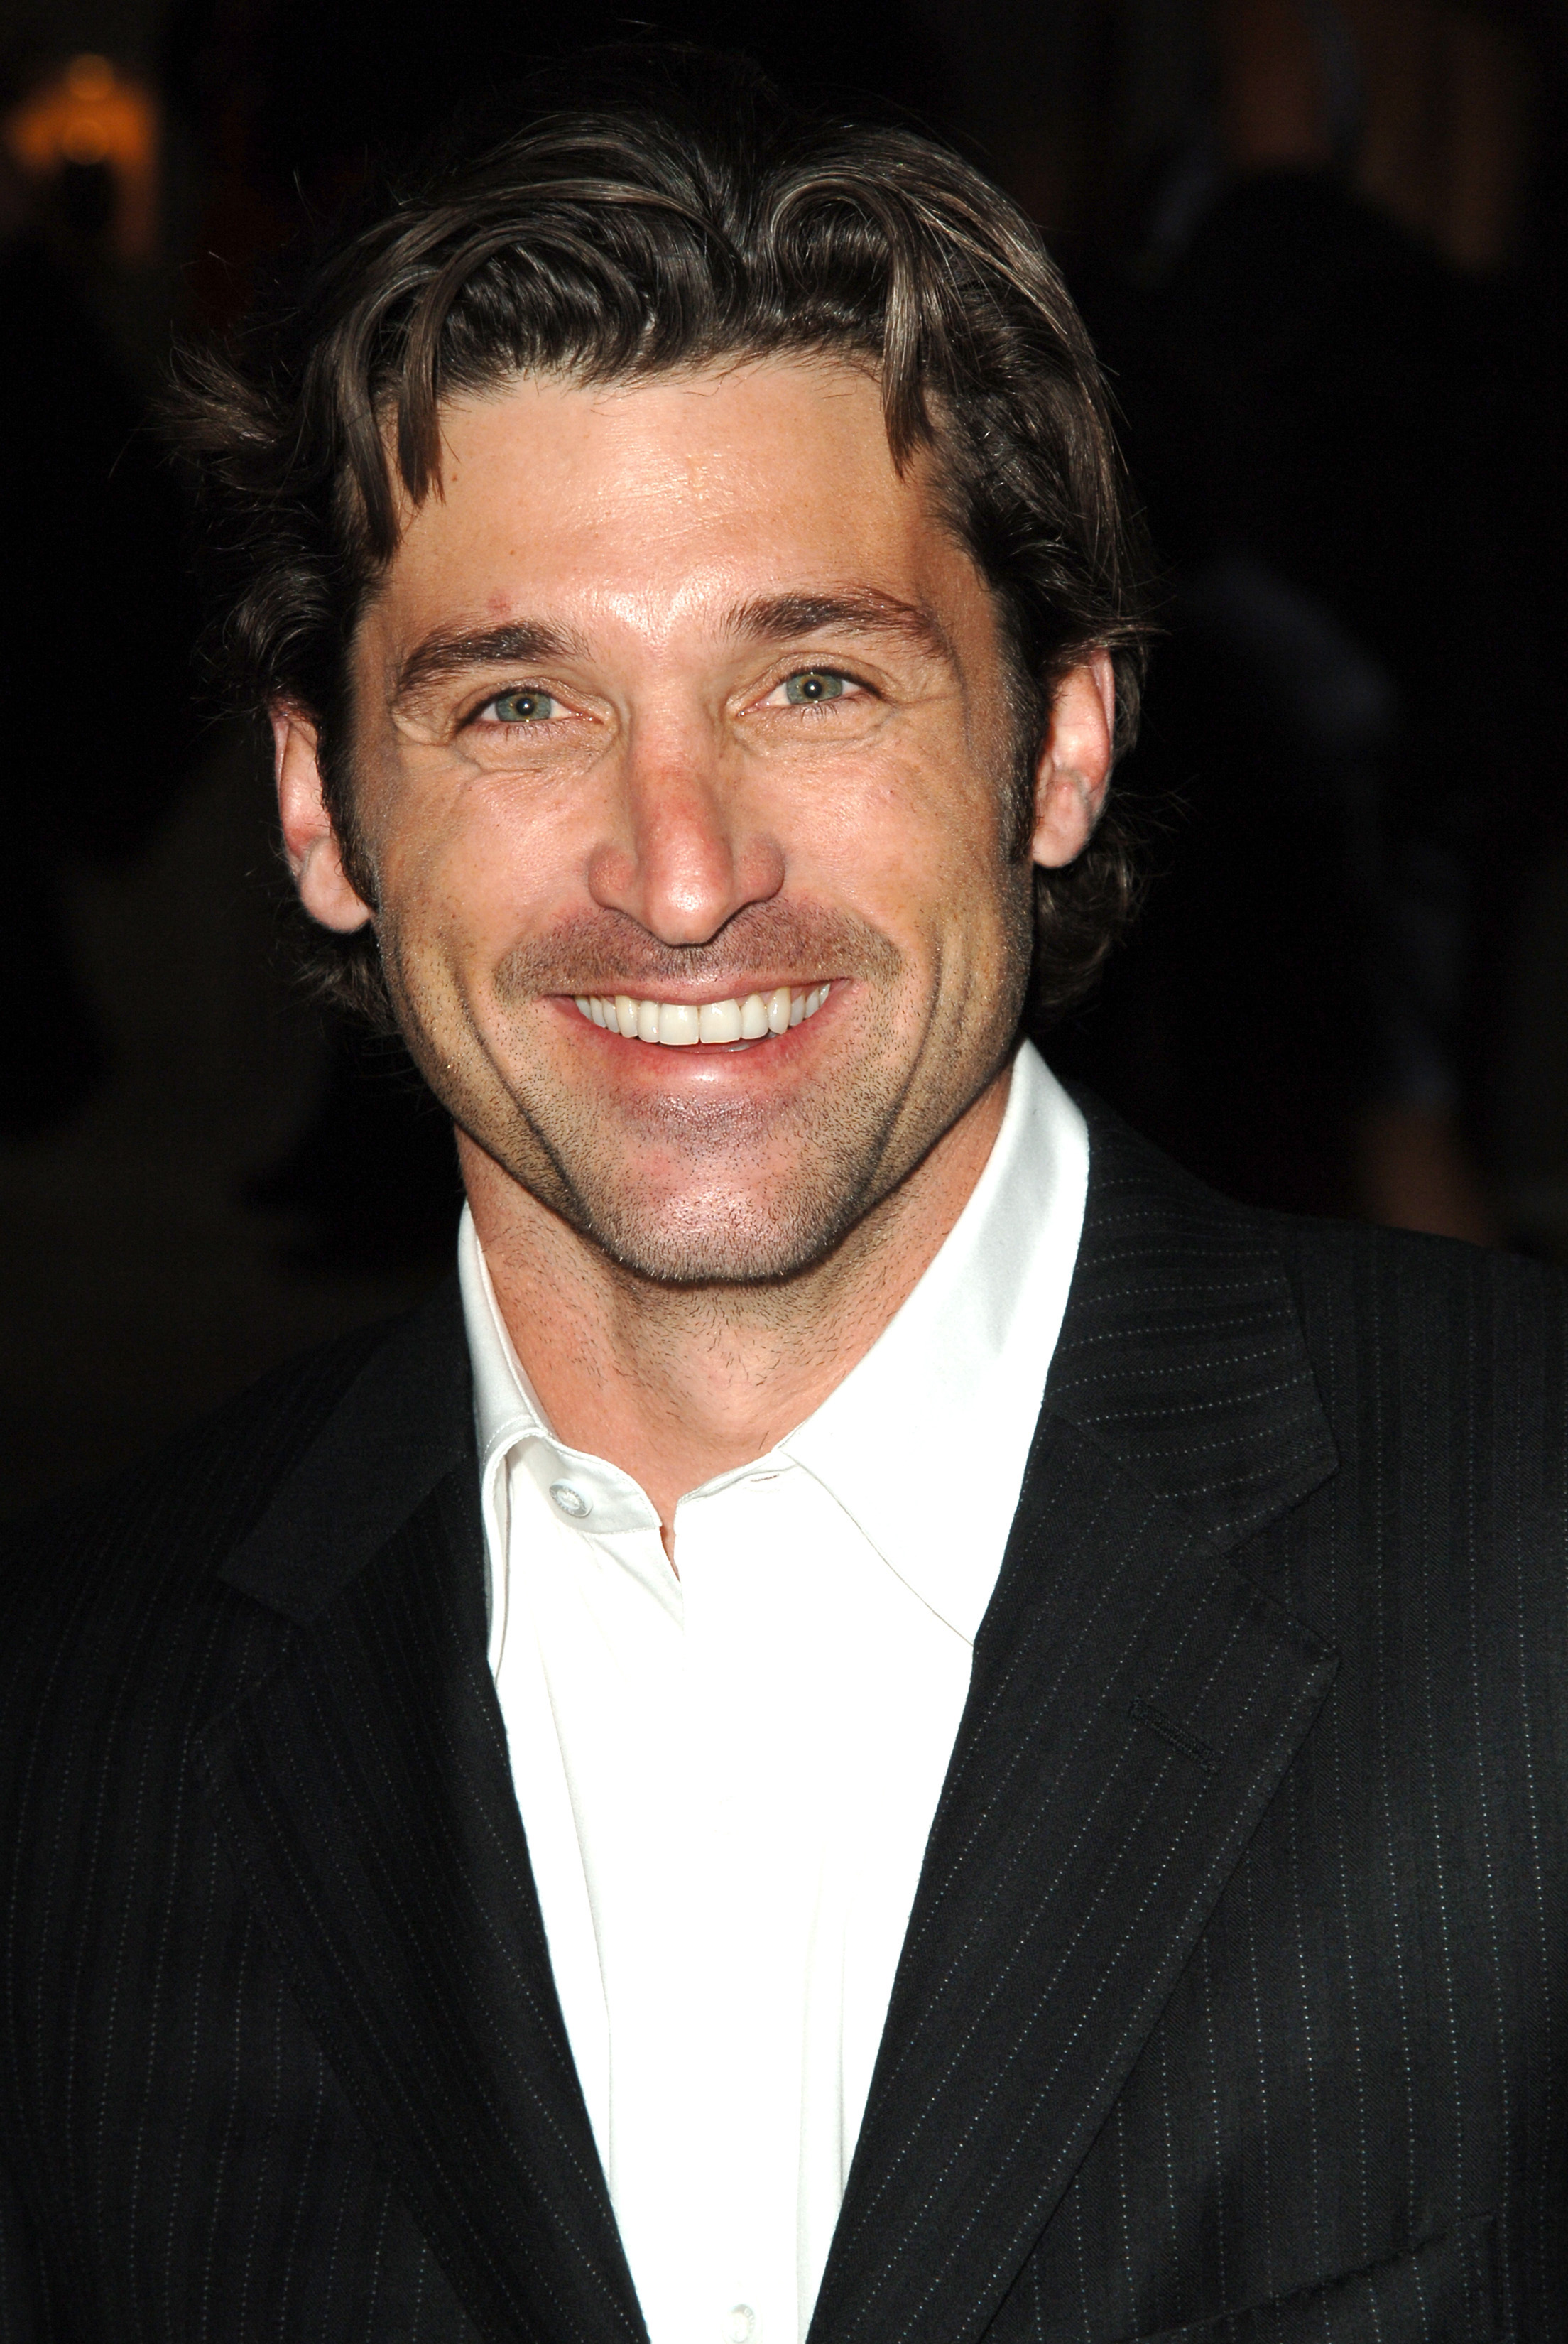 Patrick Dempsey at the Gucci Spring 2006 Fashion Show in Beverly Hills | Source: Getty Images